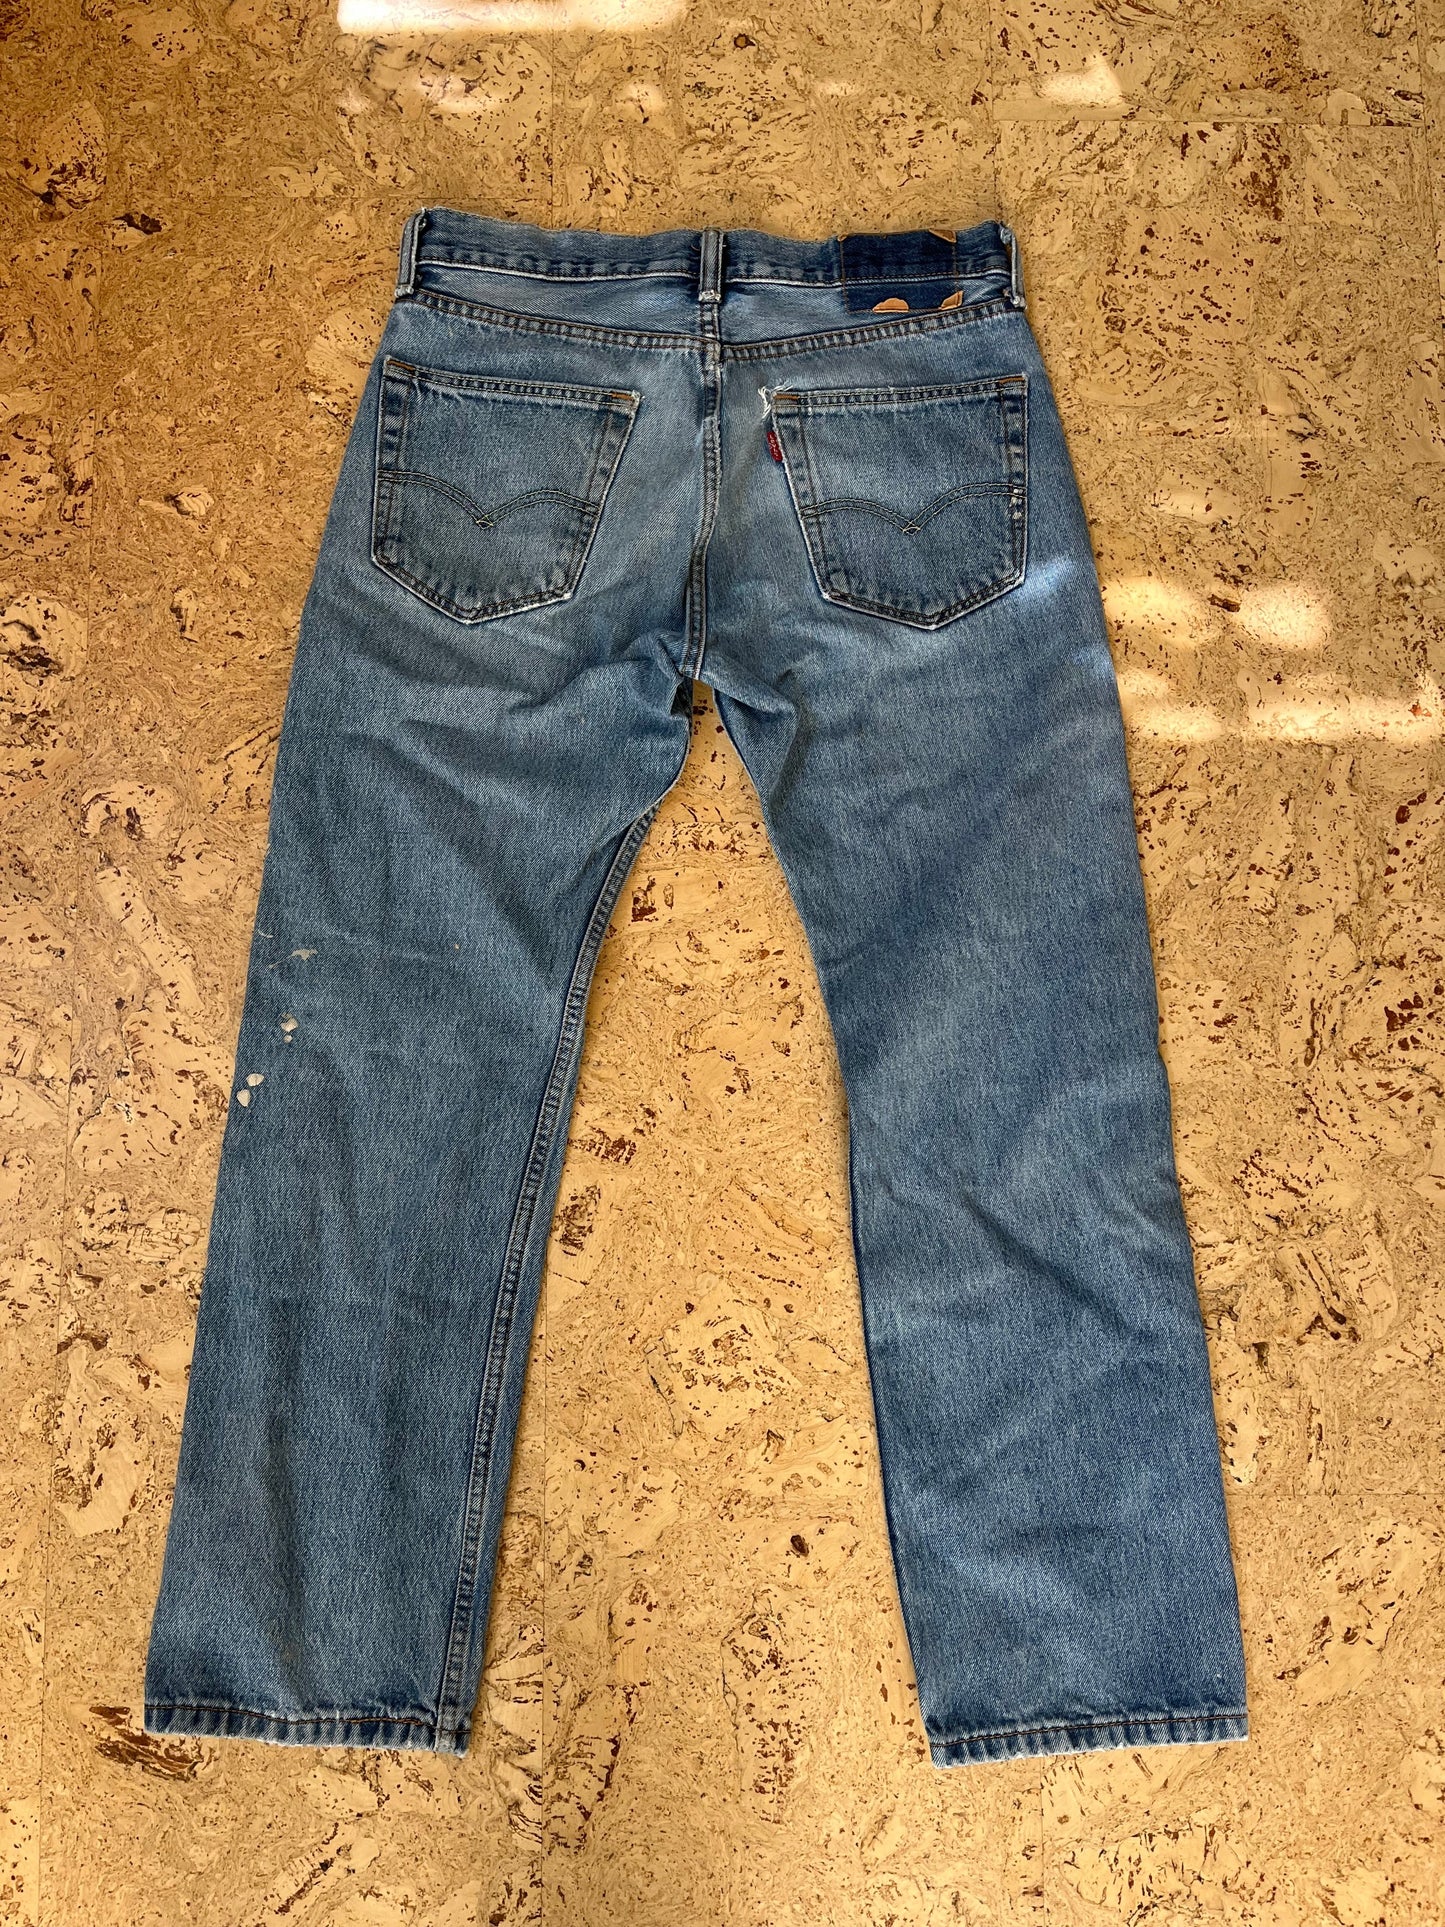 Levis Thrashed Red Tab Blue Jeans 31x30